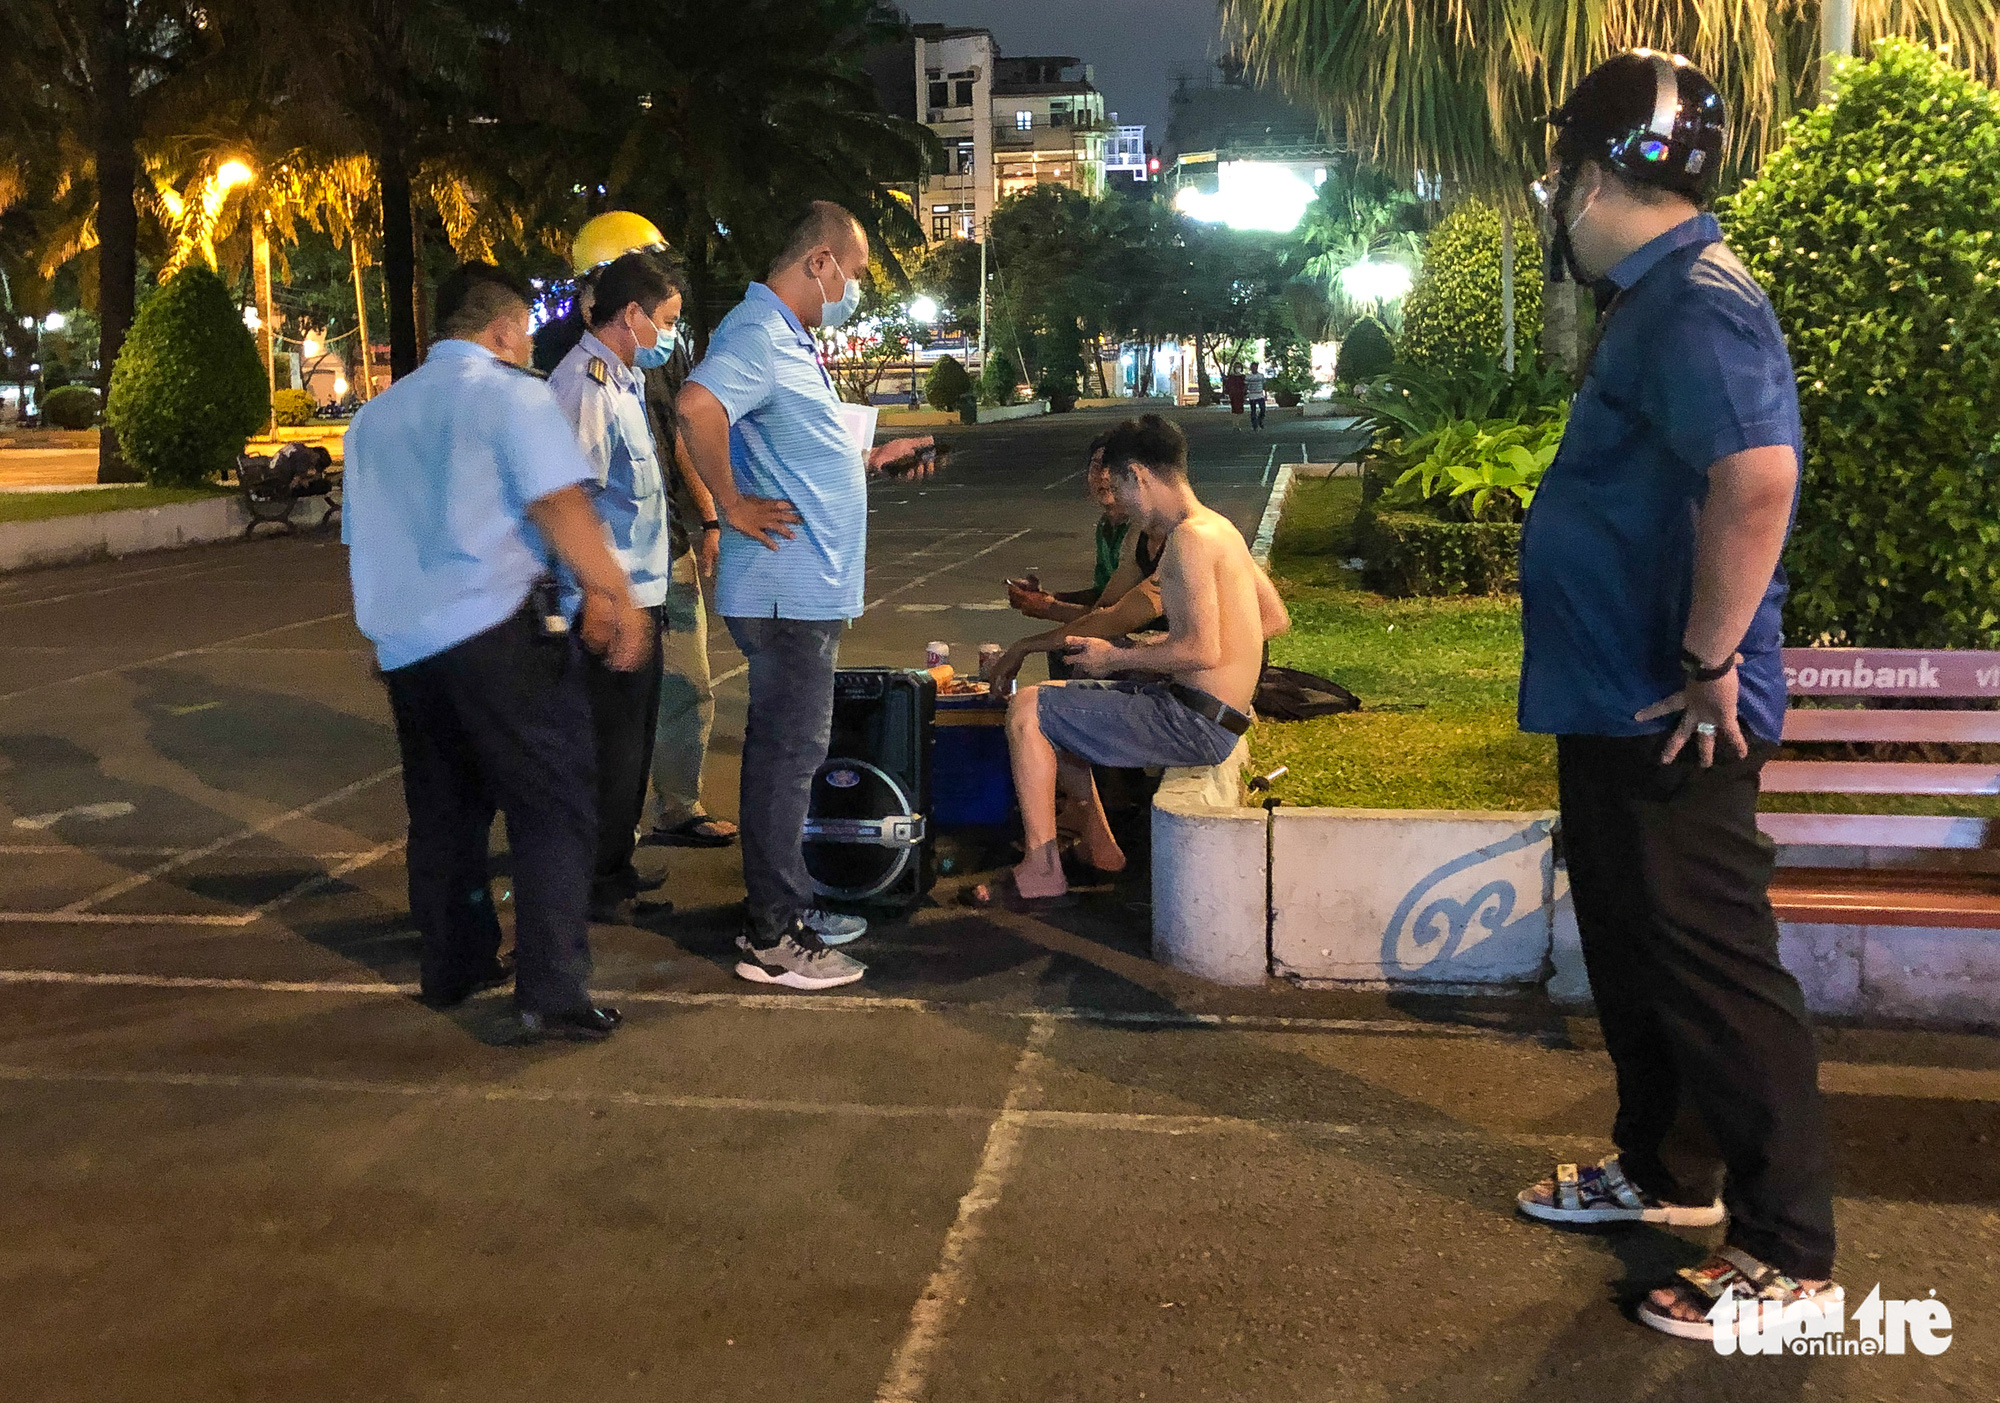 Officials remind a group to turn off their portable loudspeader, which they used for singing, at the September 23 Park in Ho Chi Minh City, Vietnam, March 20, 2021. Photo: Chau Tuan / Tuoi Tre